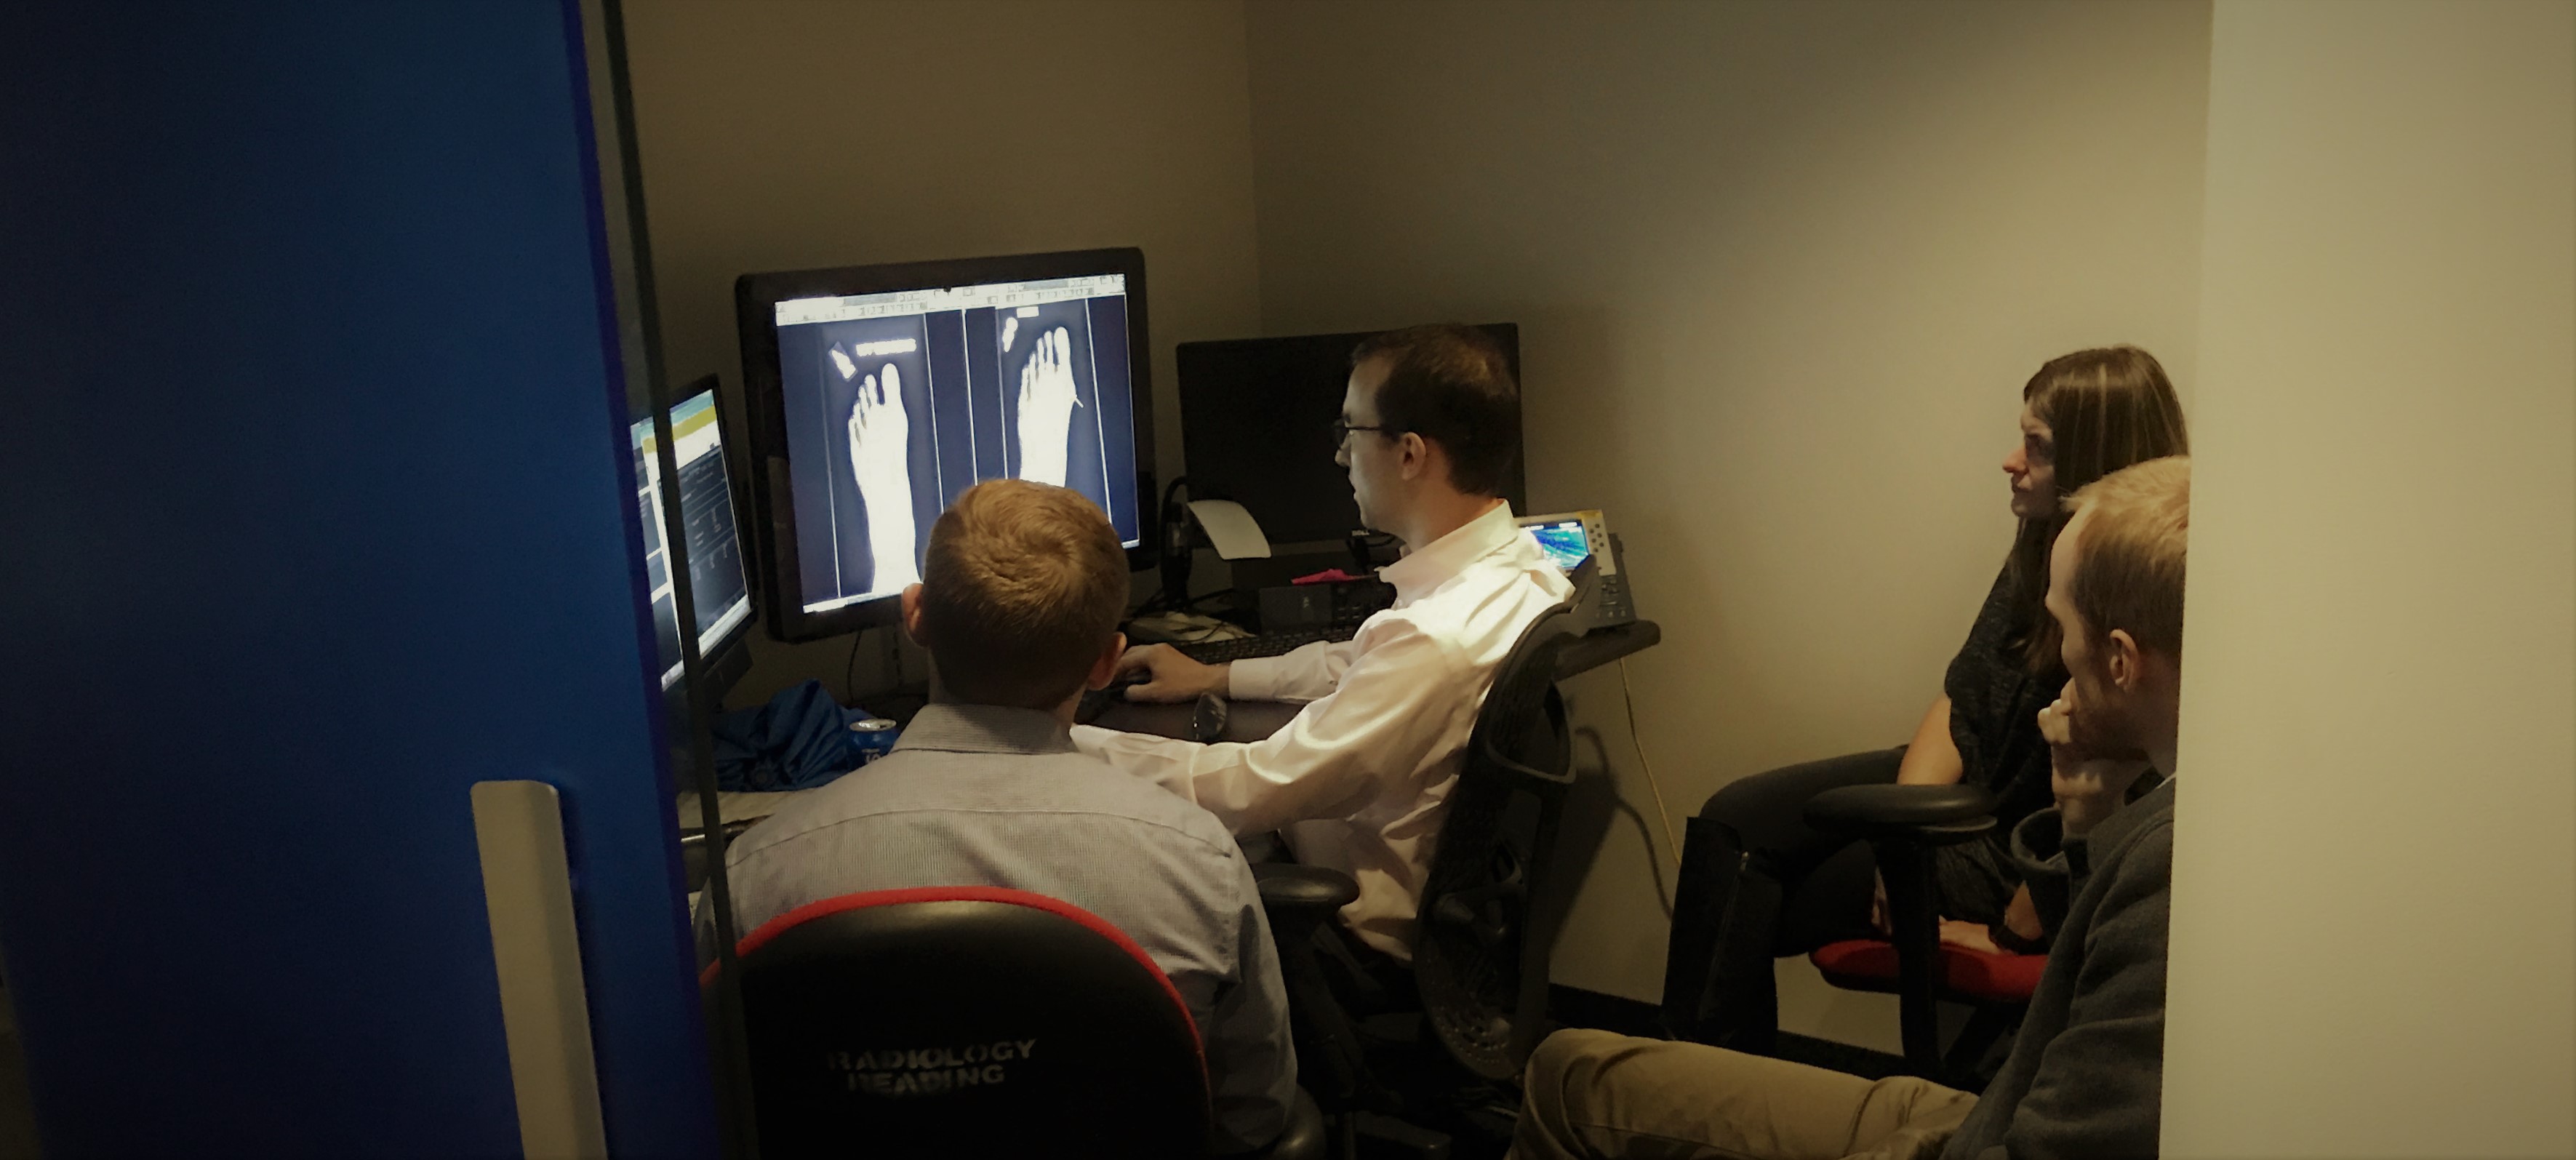 Bryan Wolf, Diagnostic Radiology, teaching medical students at a PACS station